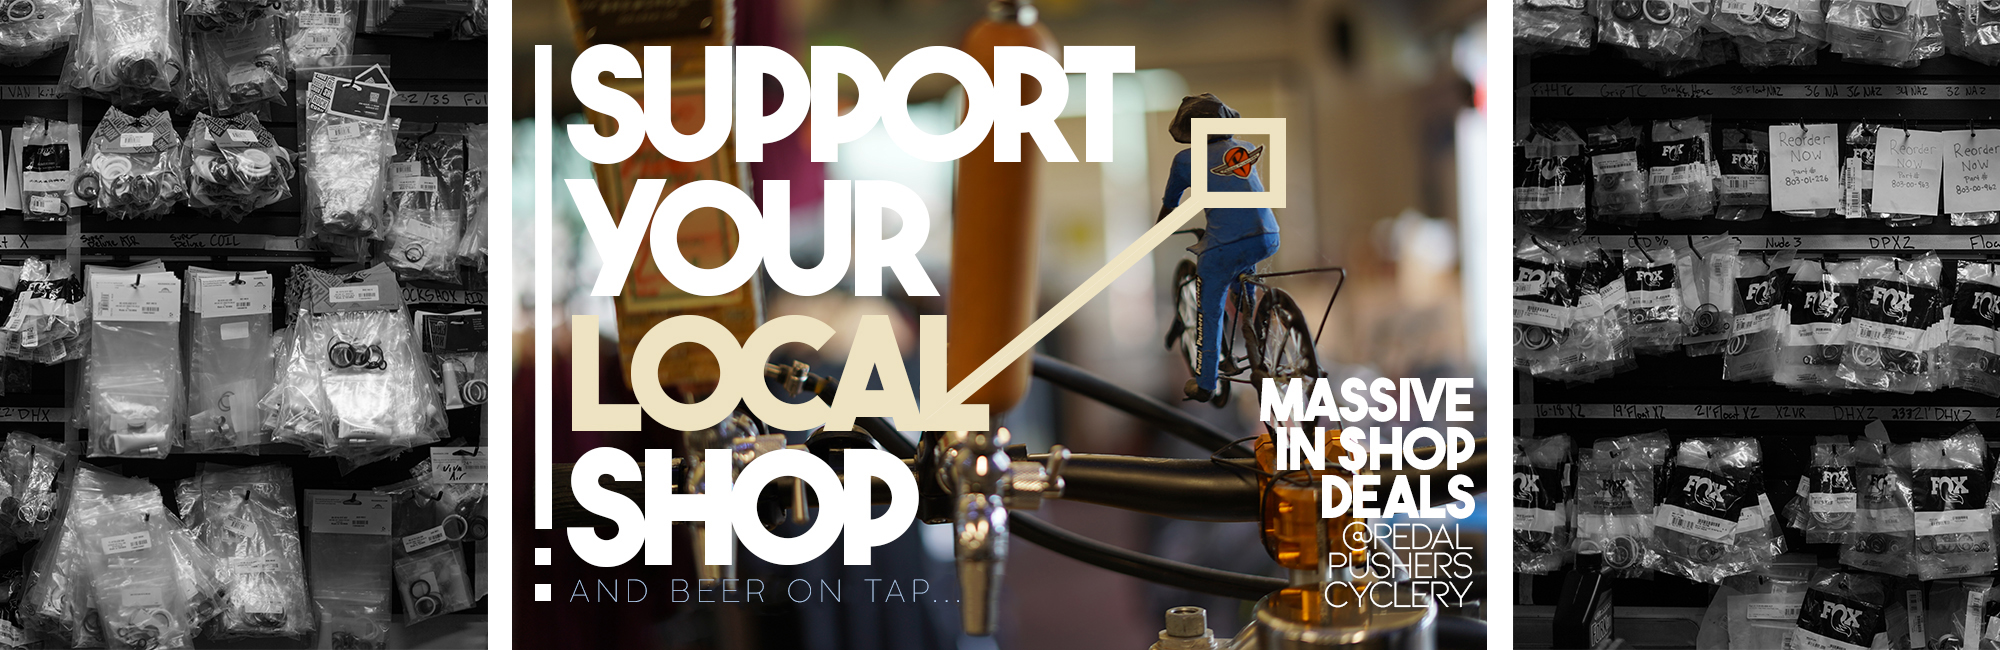 Support your local shop